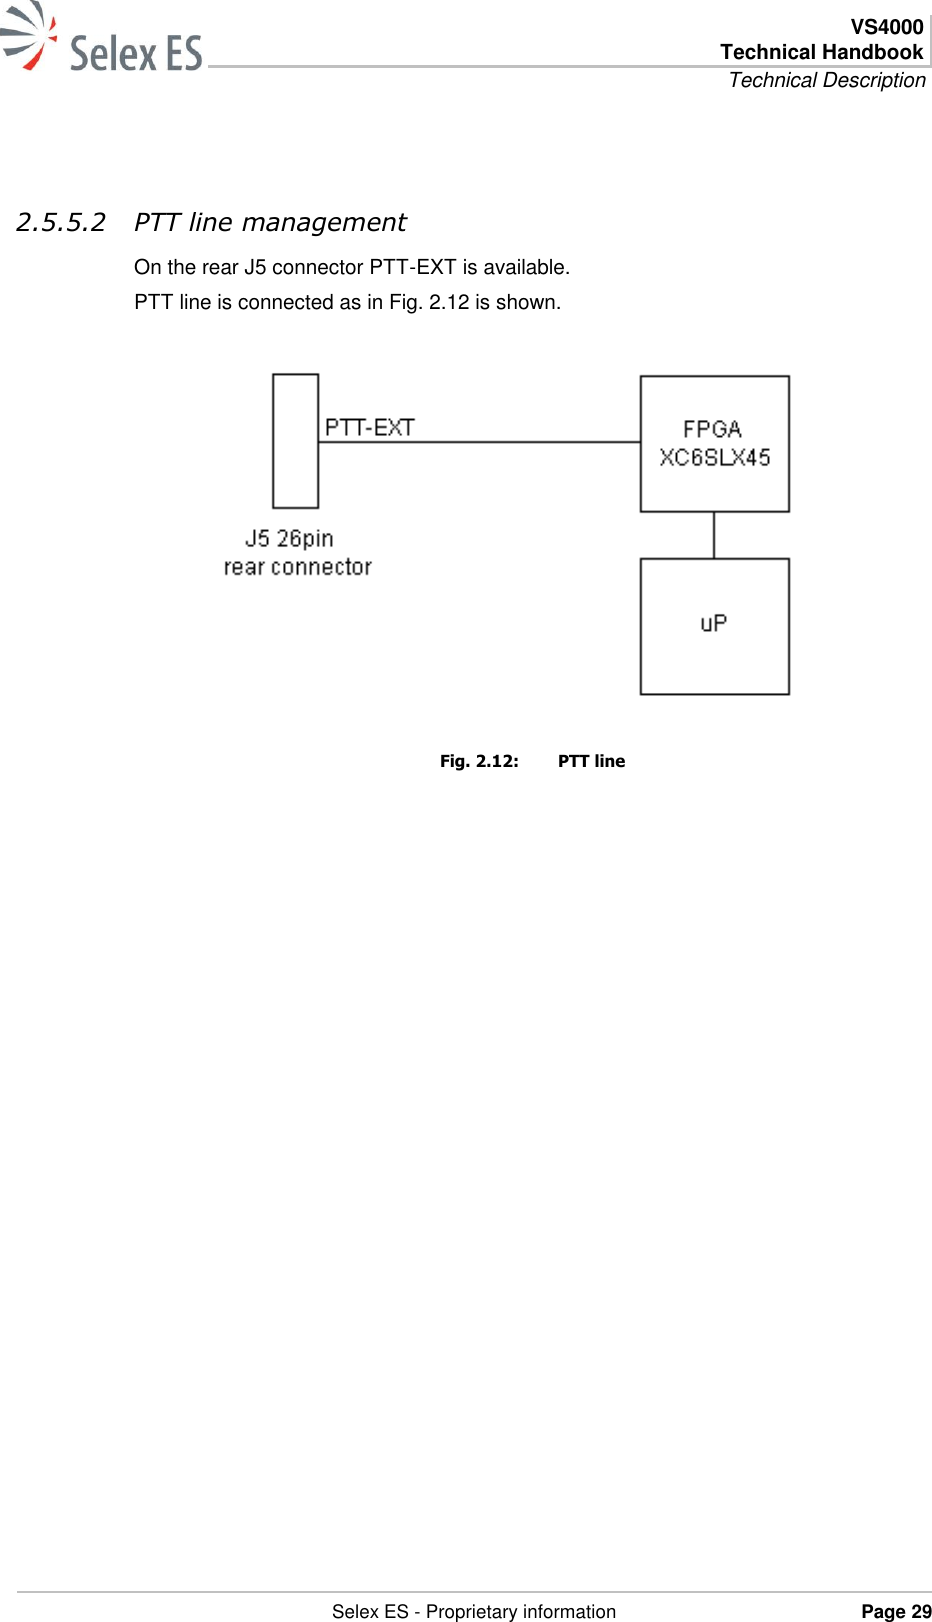  VS4000 Technical Handbook Technical Description   Selex ES - Proprietary information Page 29    2.5.5.2 PTT line management On the rear J5 connector PTT-EXT is available. PTT line is connected as in Fig. 2.12 is shown.   Fig. 2.12:  PTT line 